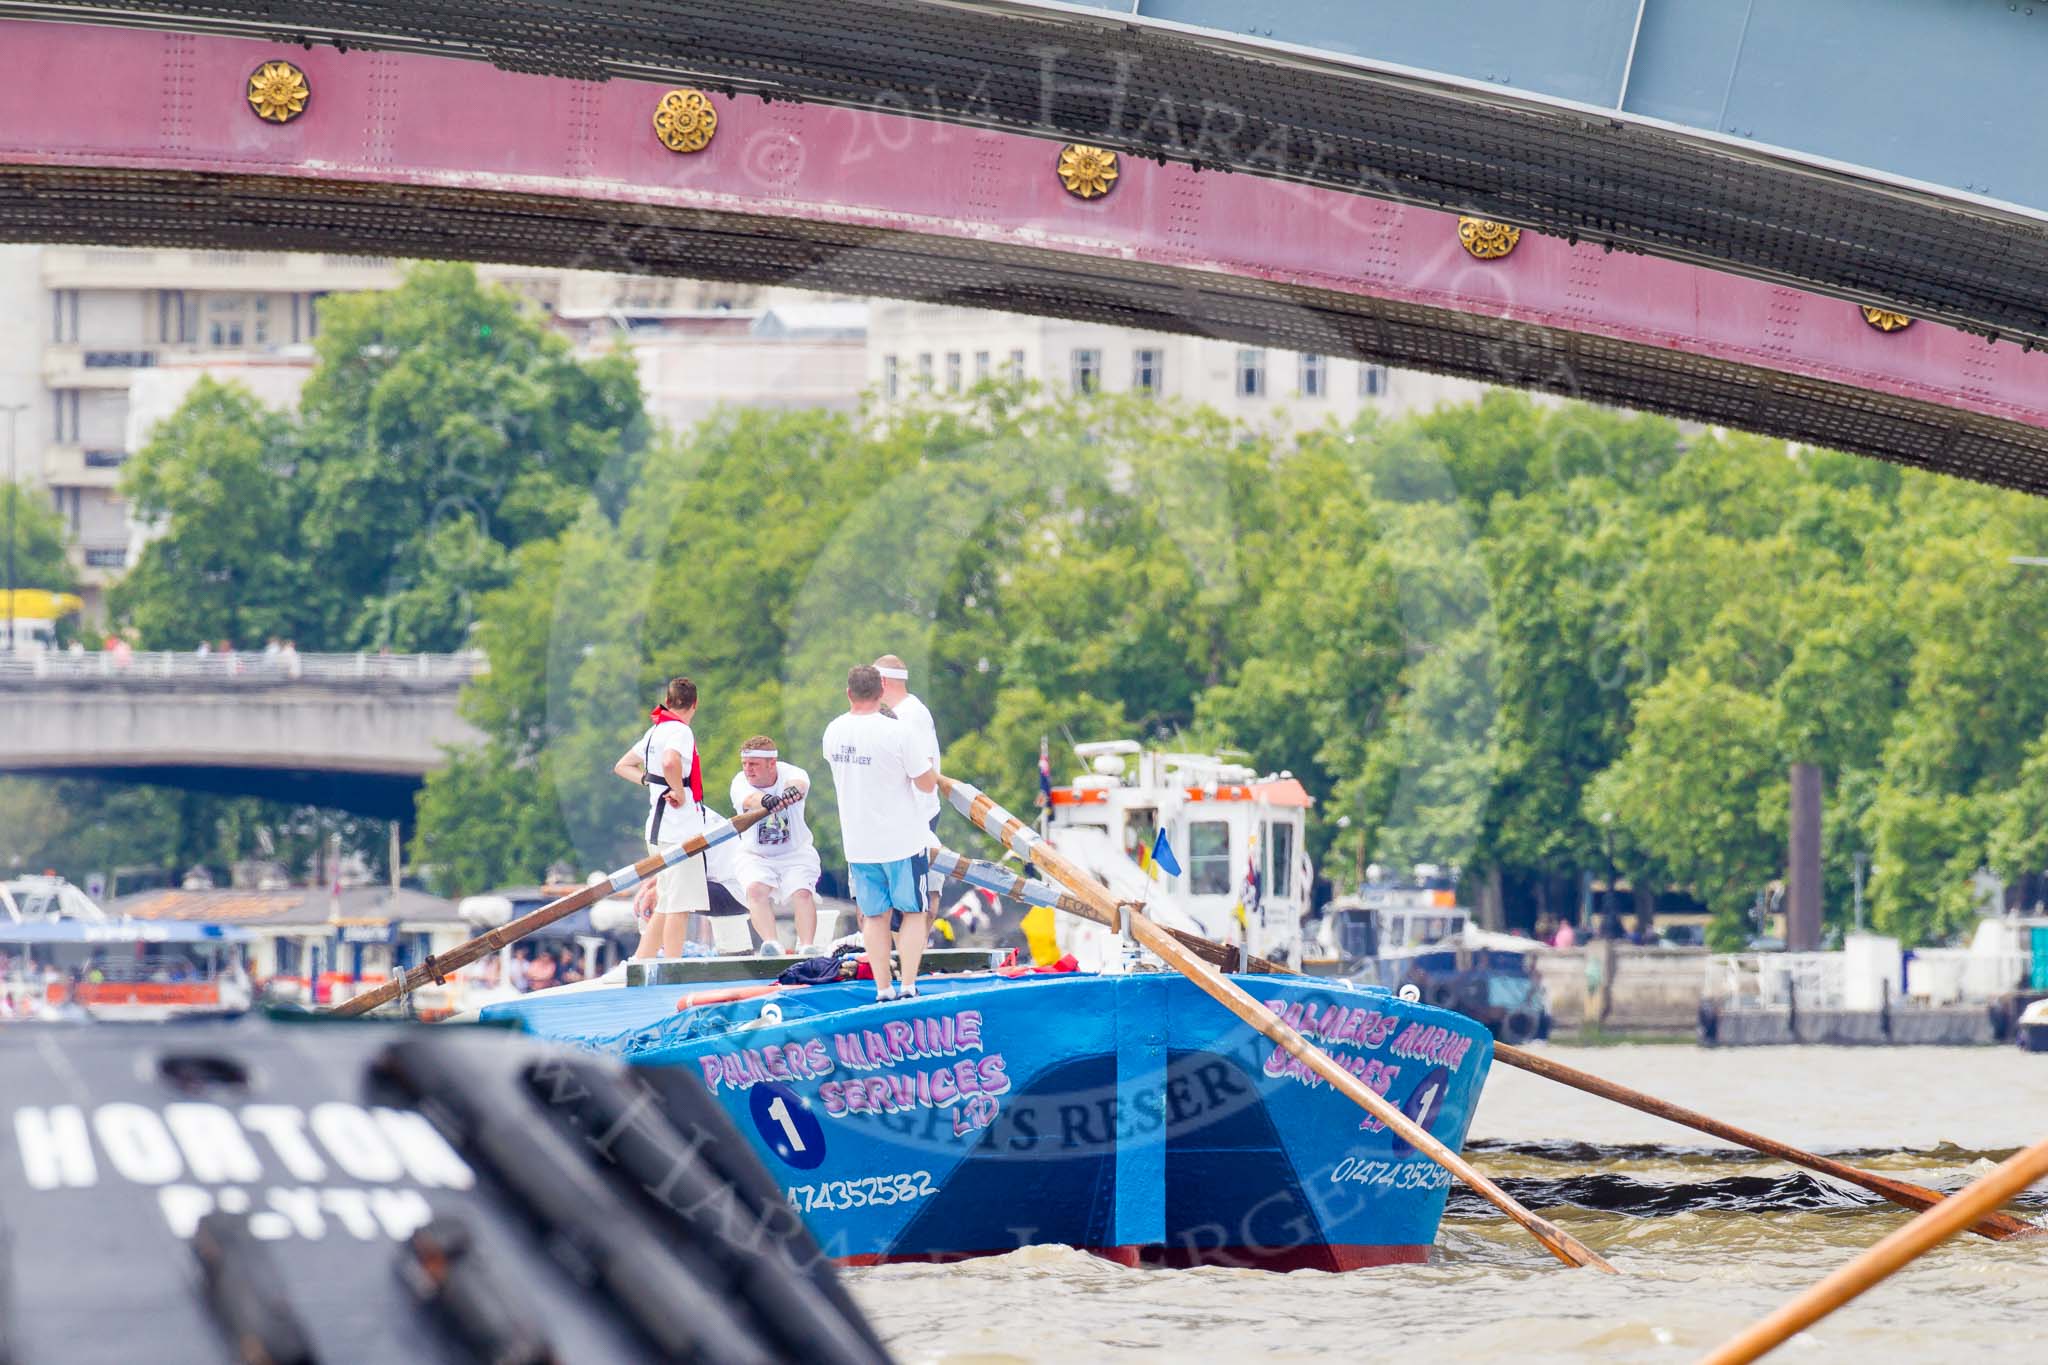 TOW River Thames Barge Driving Race 2014.
River Thames between Greenwich and Westminster,
London,

United Kingdom,
on 28 June 2014 at 13:53, image #326